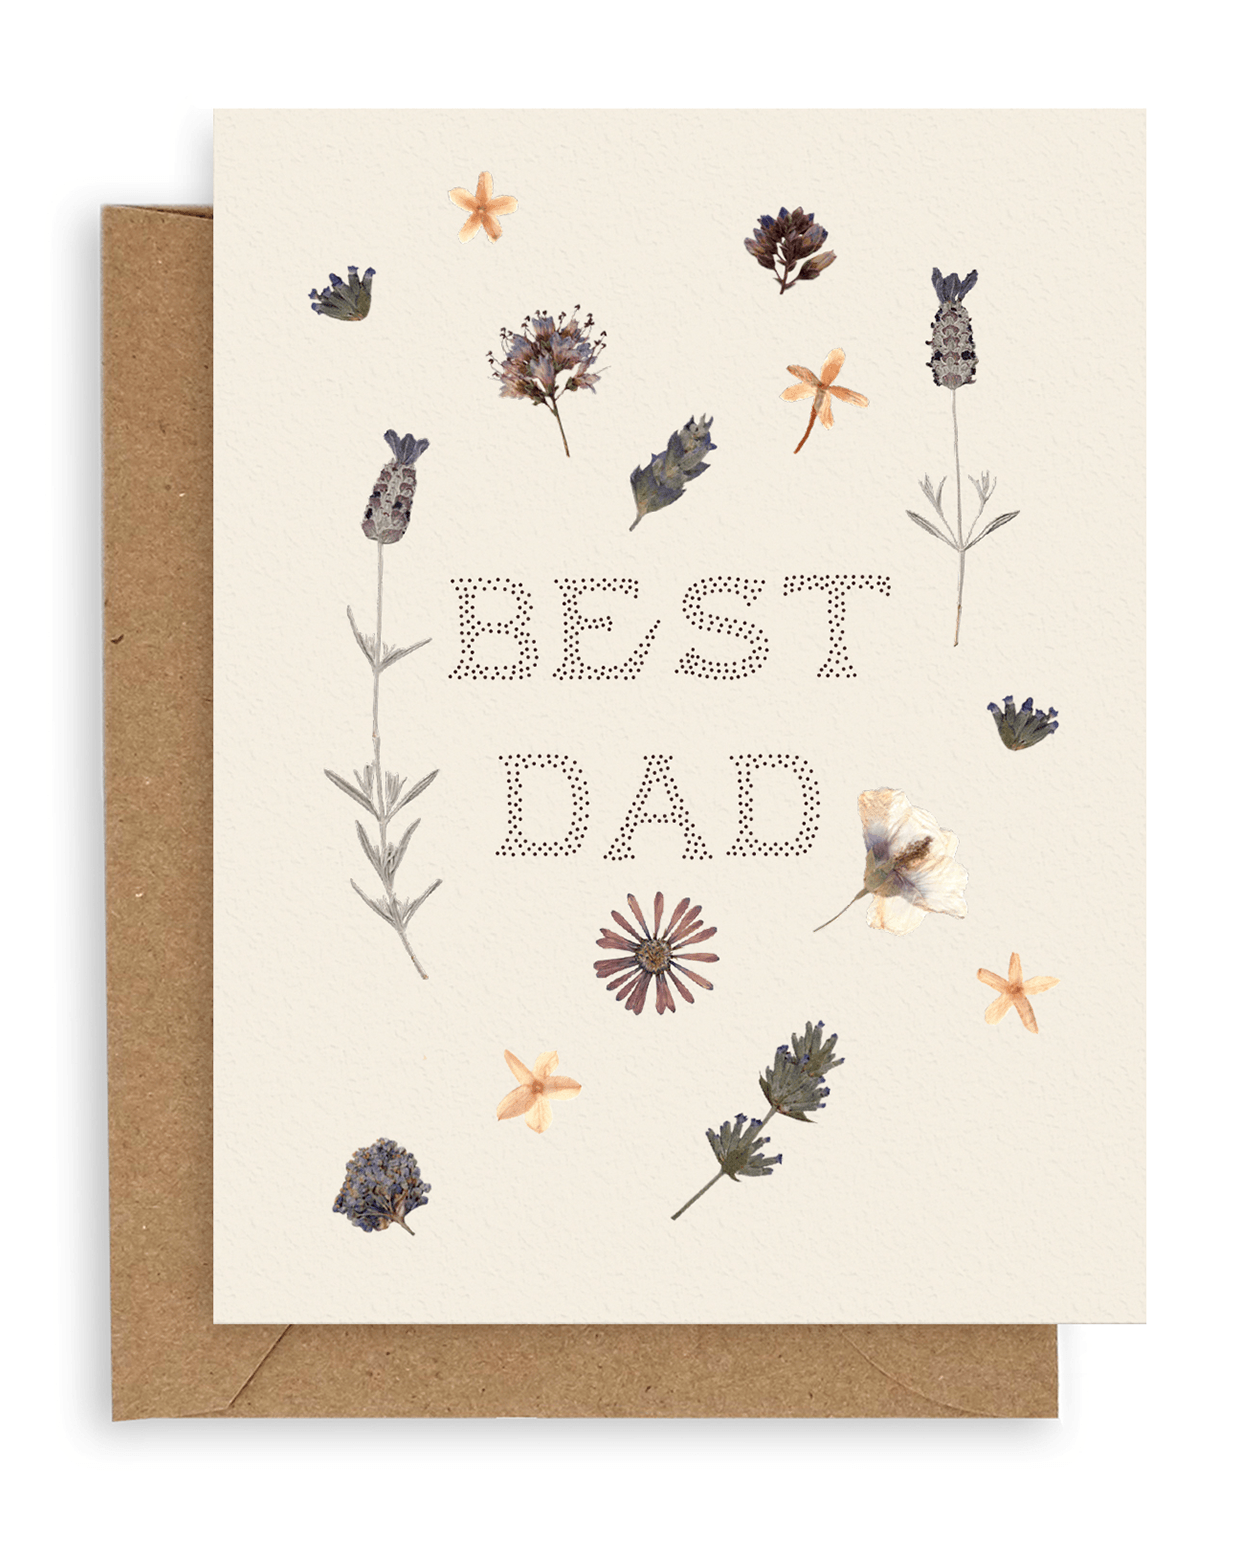 Cream colored card with scattered pressed flowers and the words "Best Dad" in pointillism style font. Shown with kraft envelope.